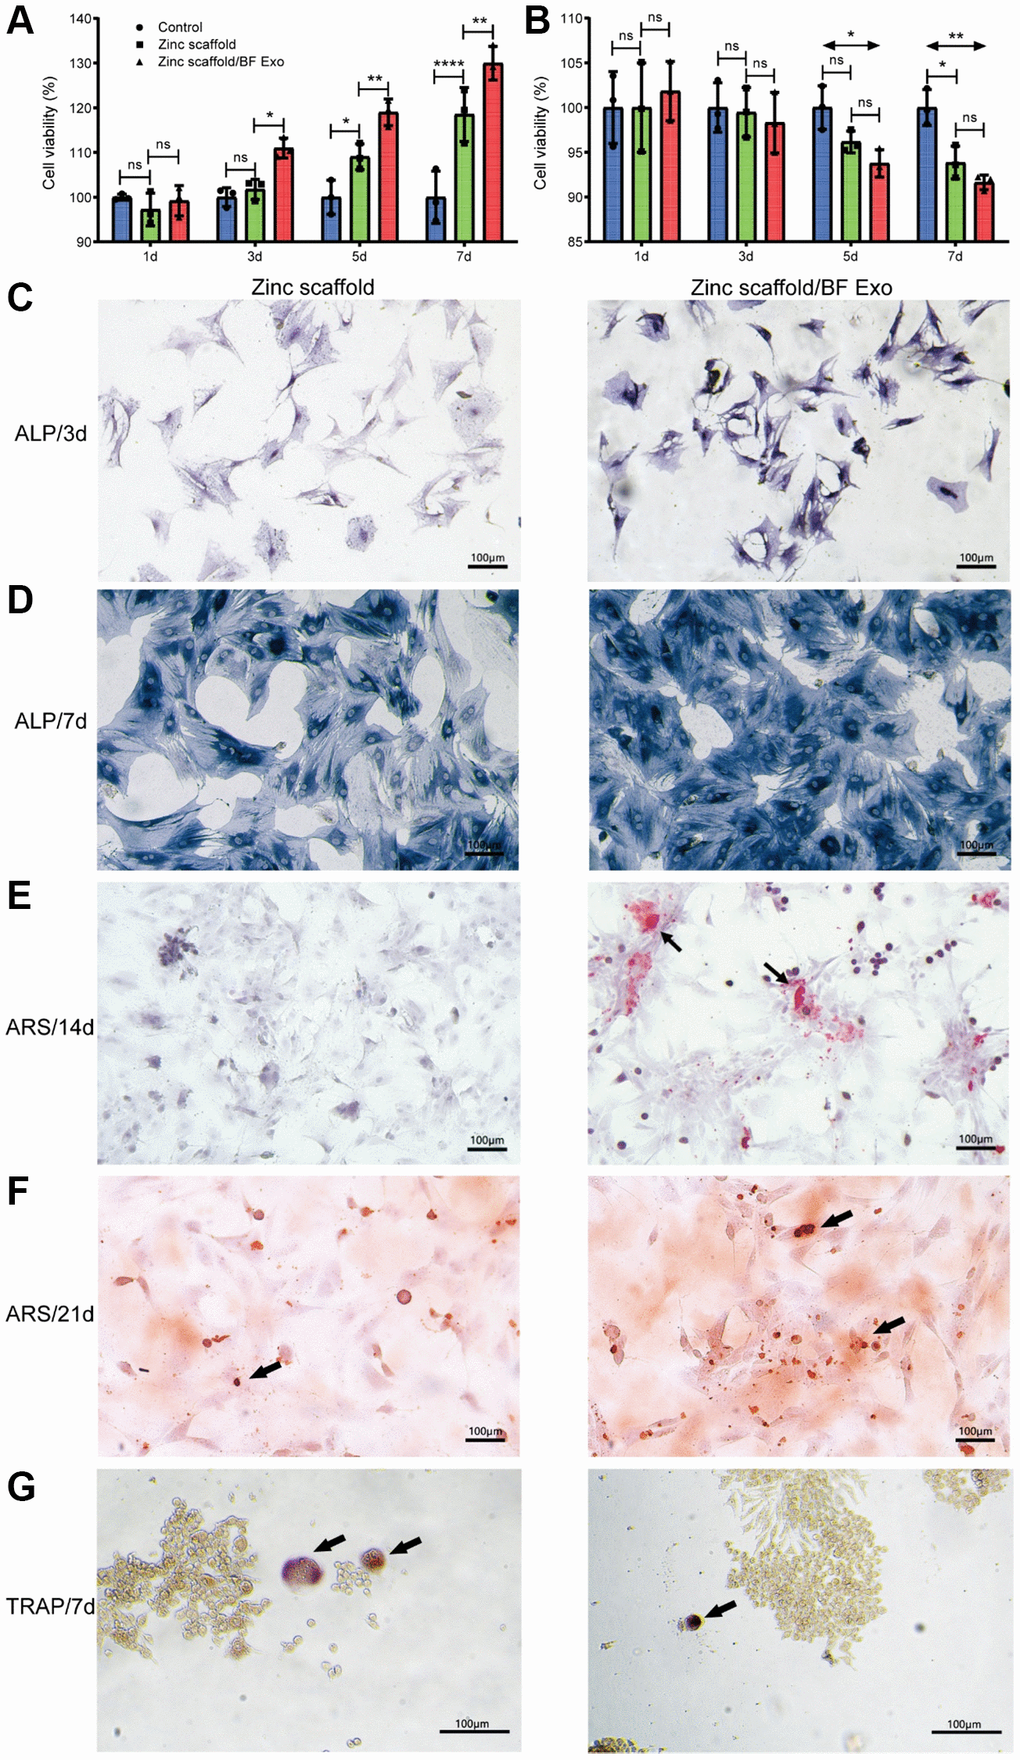 In vitro osteogenic performance assessment of zinc scaffold/BF Exo composite implant. (A) The CCK-8 experiment was used to measure the cell viability of BMSCs after osteogenic induction for 1, 3, 5, and 7 days; (B) The CCK-8 experiment was used to assess the cell viability of RAW264.7 cells after osteoclast induction for the same time periods; (C, D) ALP staining was conducted for BMSCs after 3 and 7 days of osteogenic induction, where darker staining indicated stronger positive expression; (E, F) Alizarin Red staining was performed for BMSCs after 14 and 21 days of osteogenic induction; (G) TRAP staining was conducted for RAW264.7 cells after 7 days of osteoclast induction (*P **P ****P P > 0.05, n = 3).